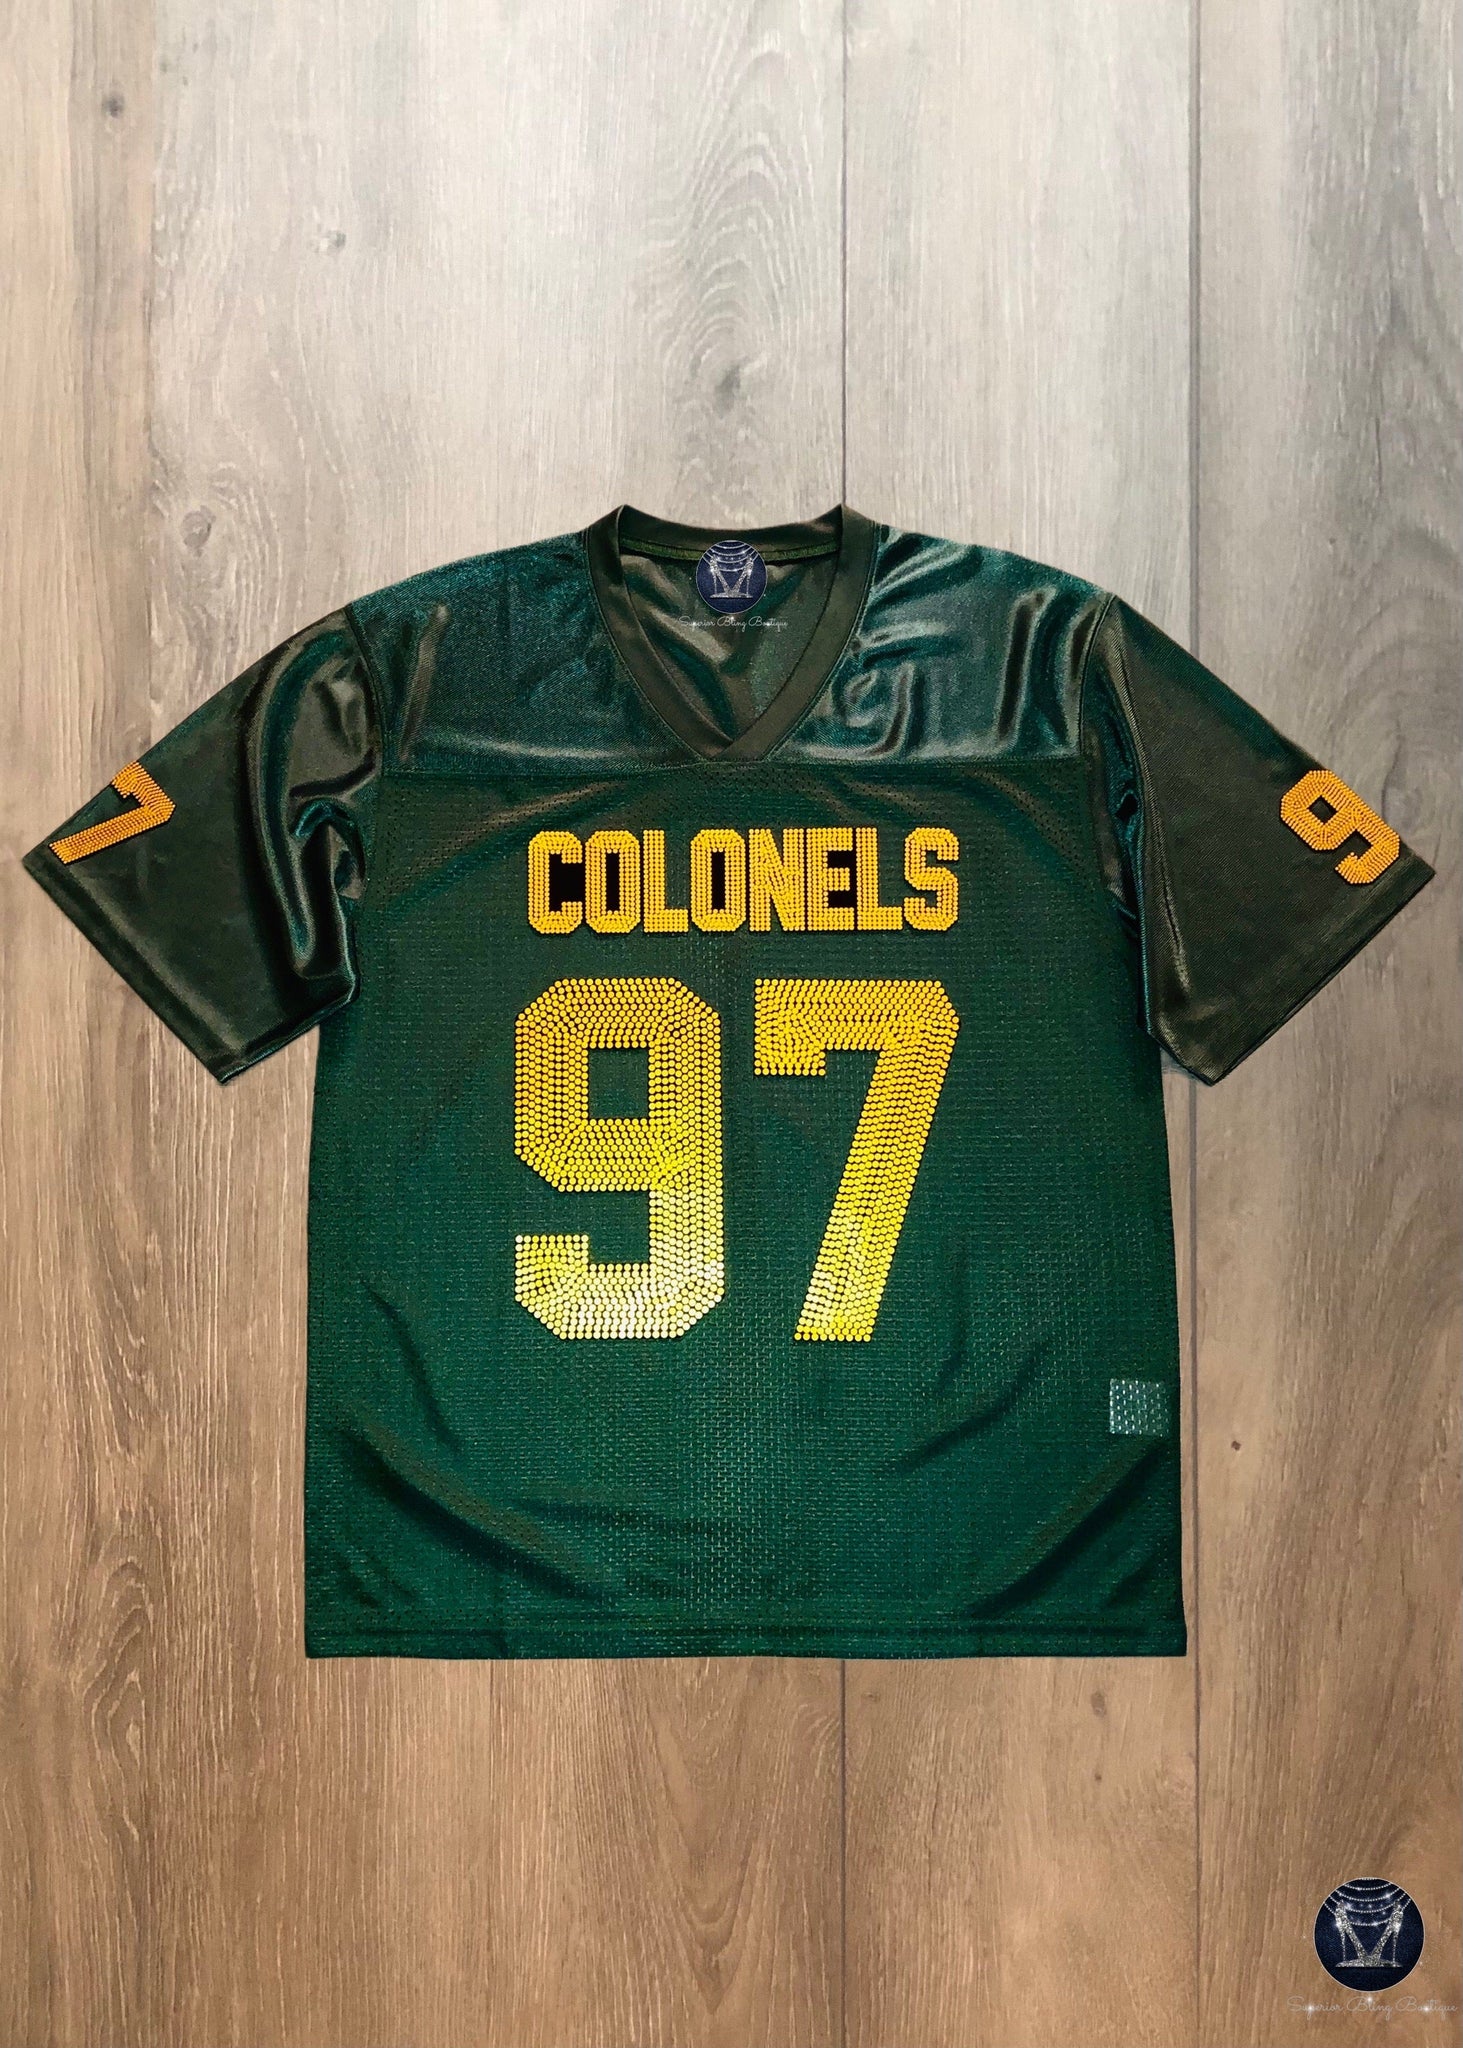 WHS Colonels Men's Patchwork Jersey - FRONT DESIGN ONLY